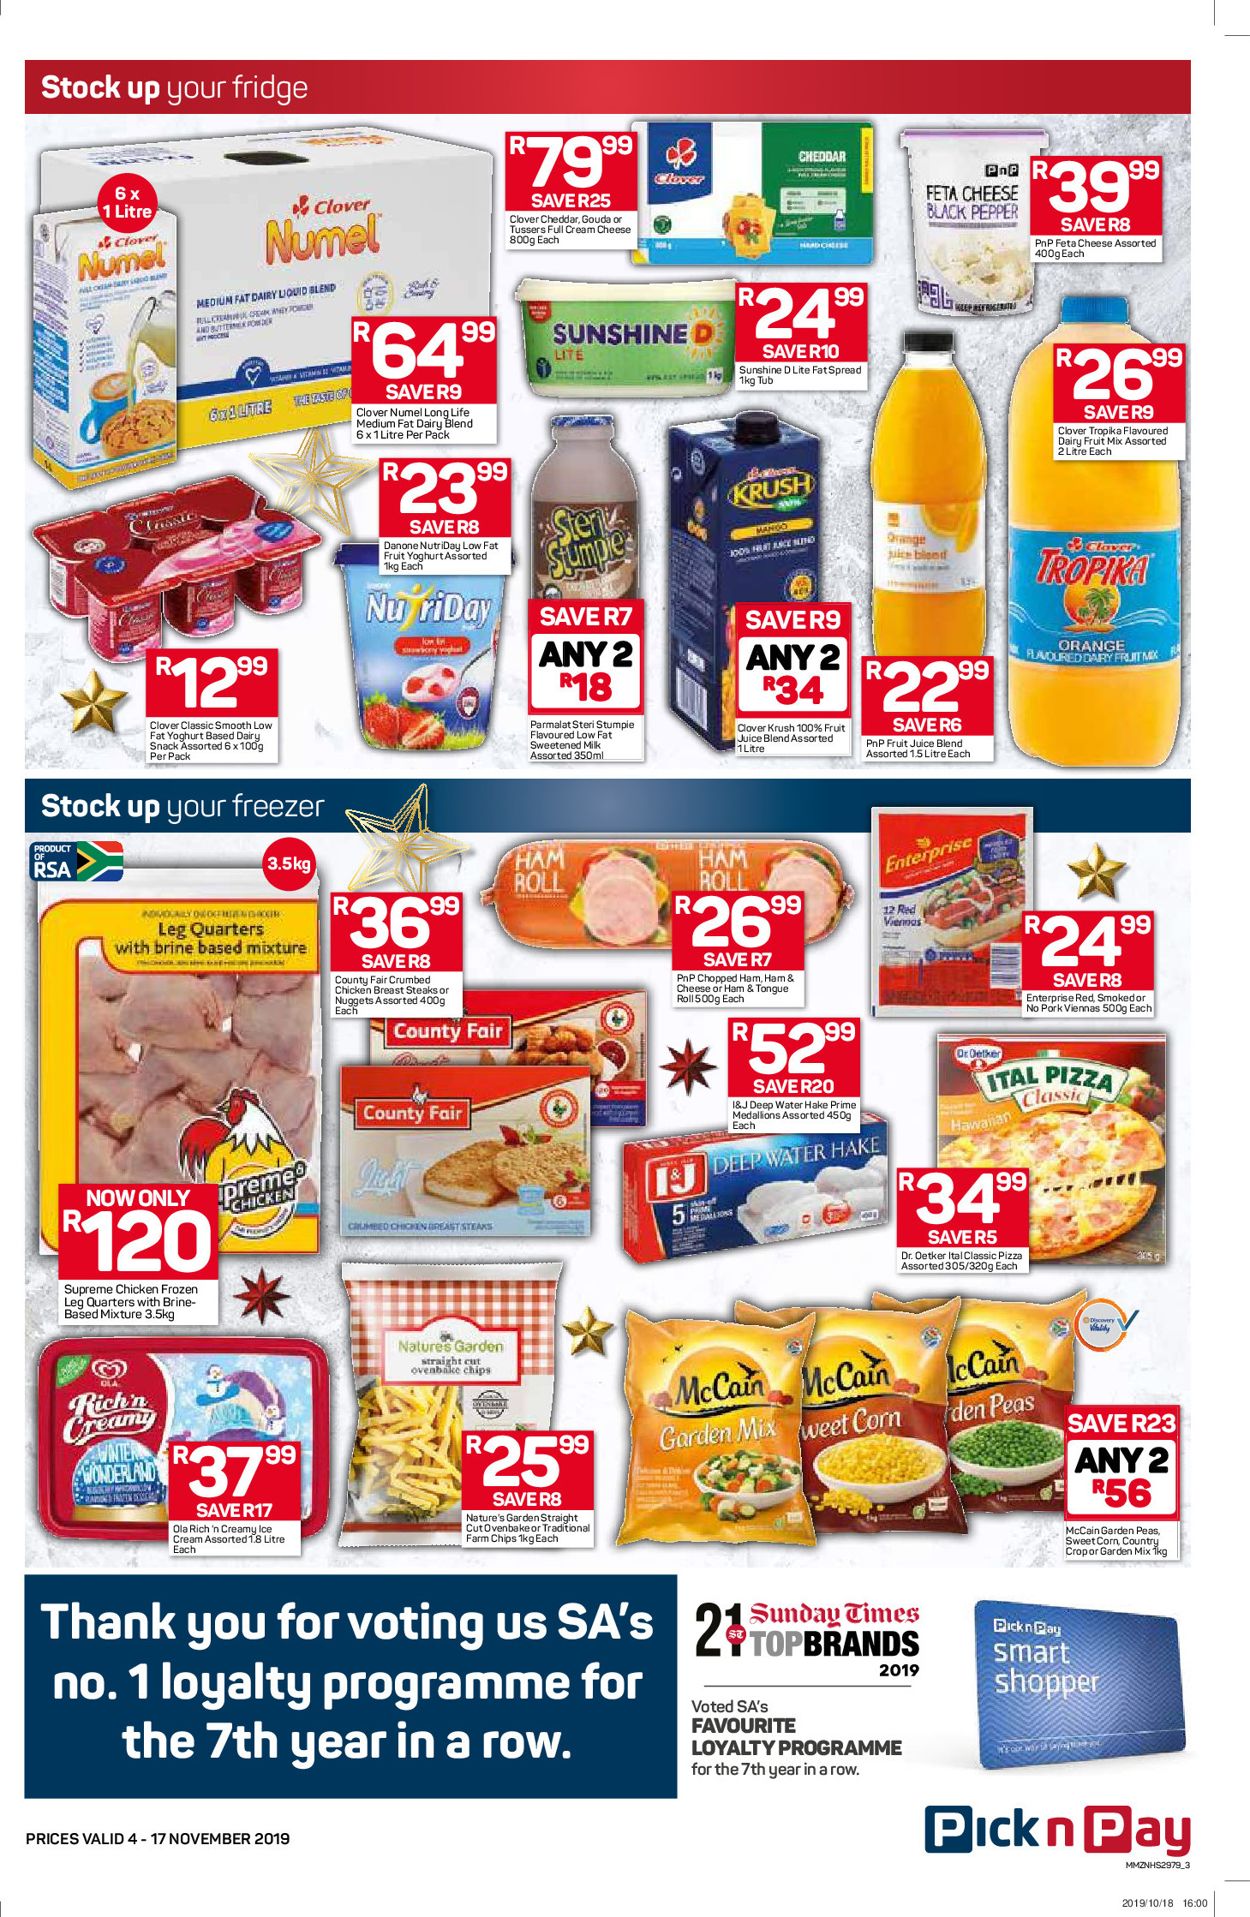 Pick n Pay Catalogue - 2019/11/04-2019/11/17 (Page 4)